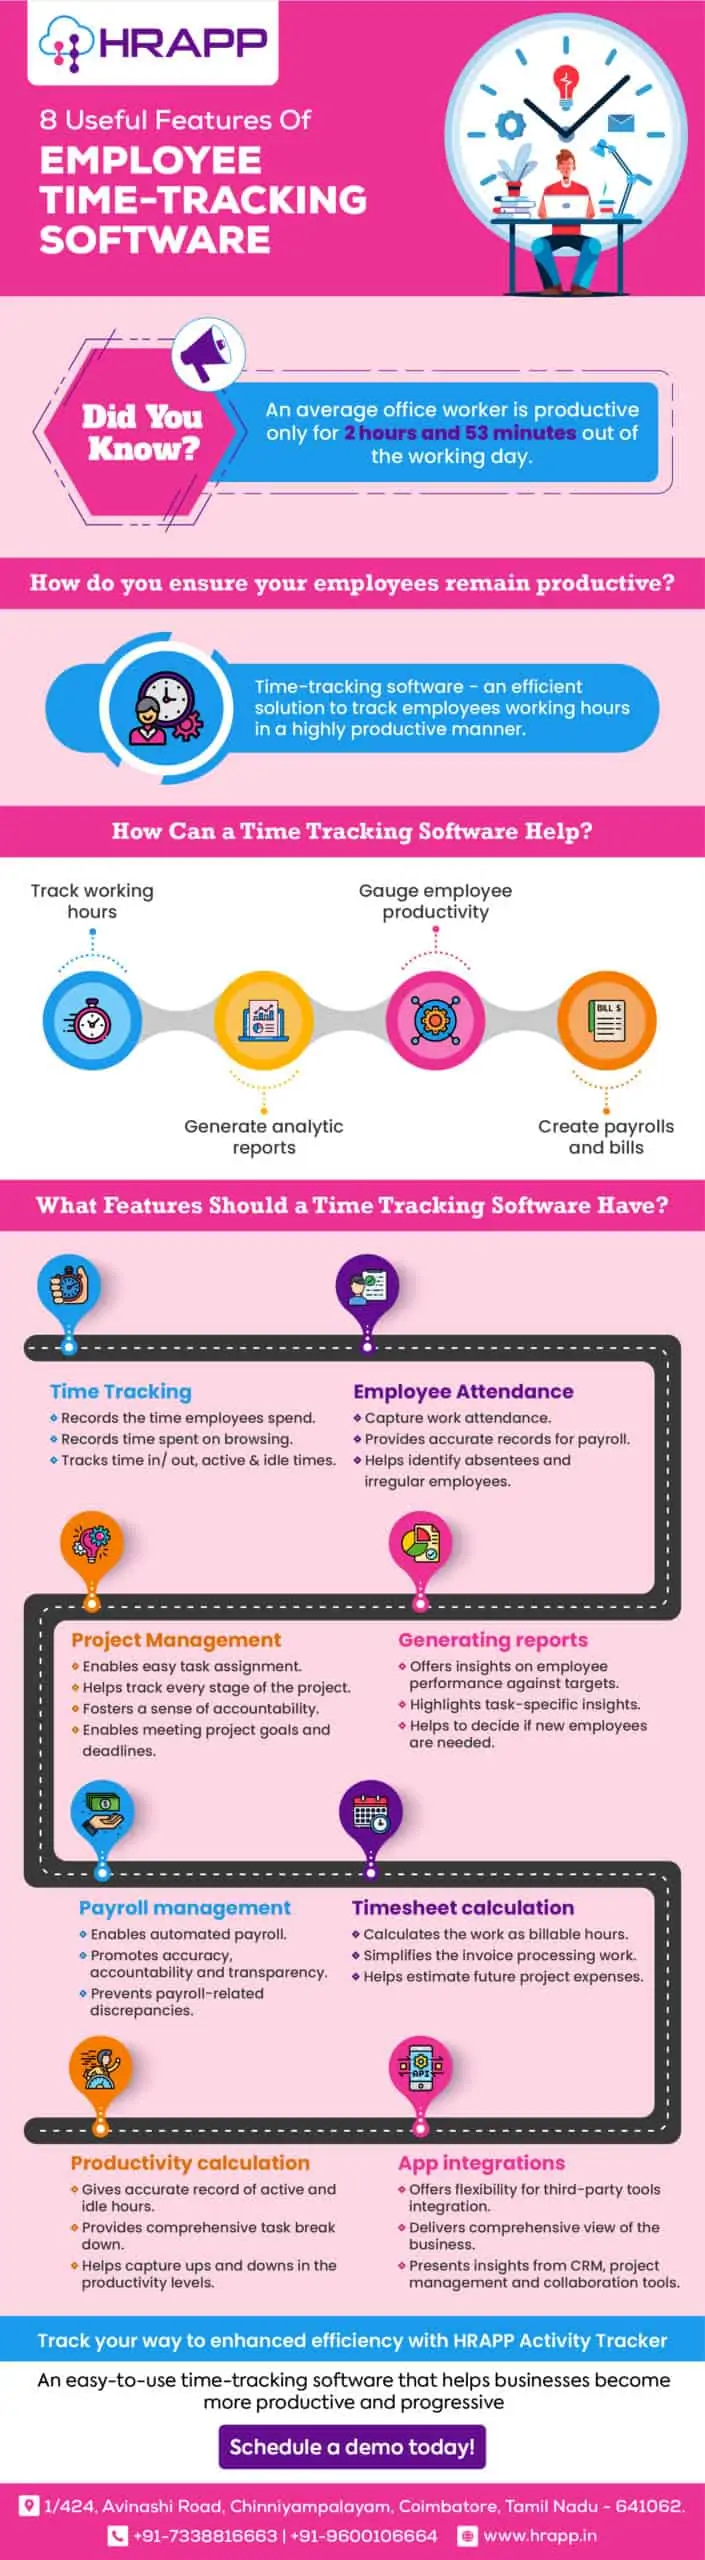 Features Of HRAPPs Employee Monitoring Software - Infographics King